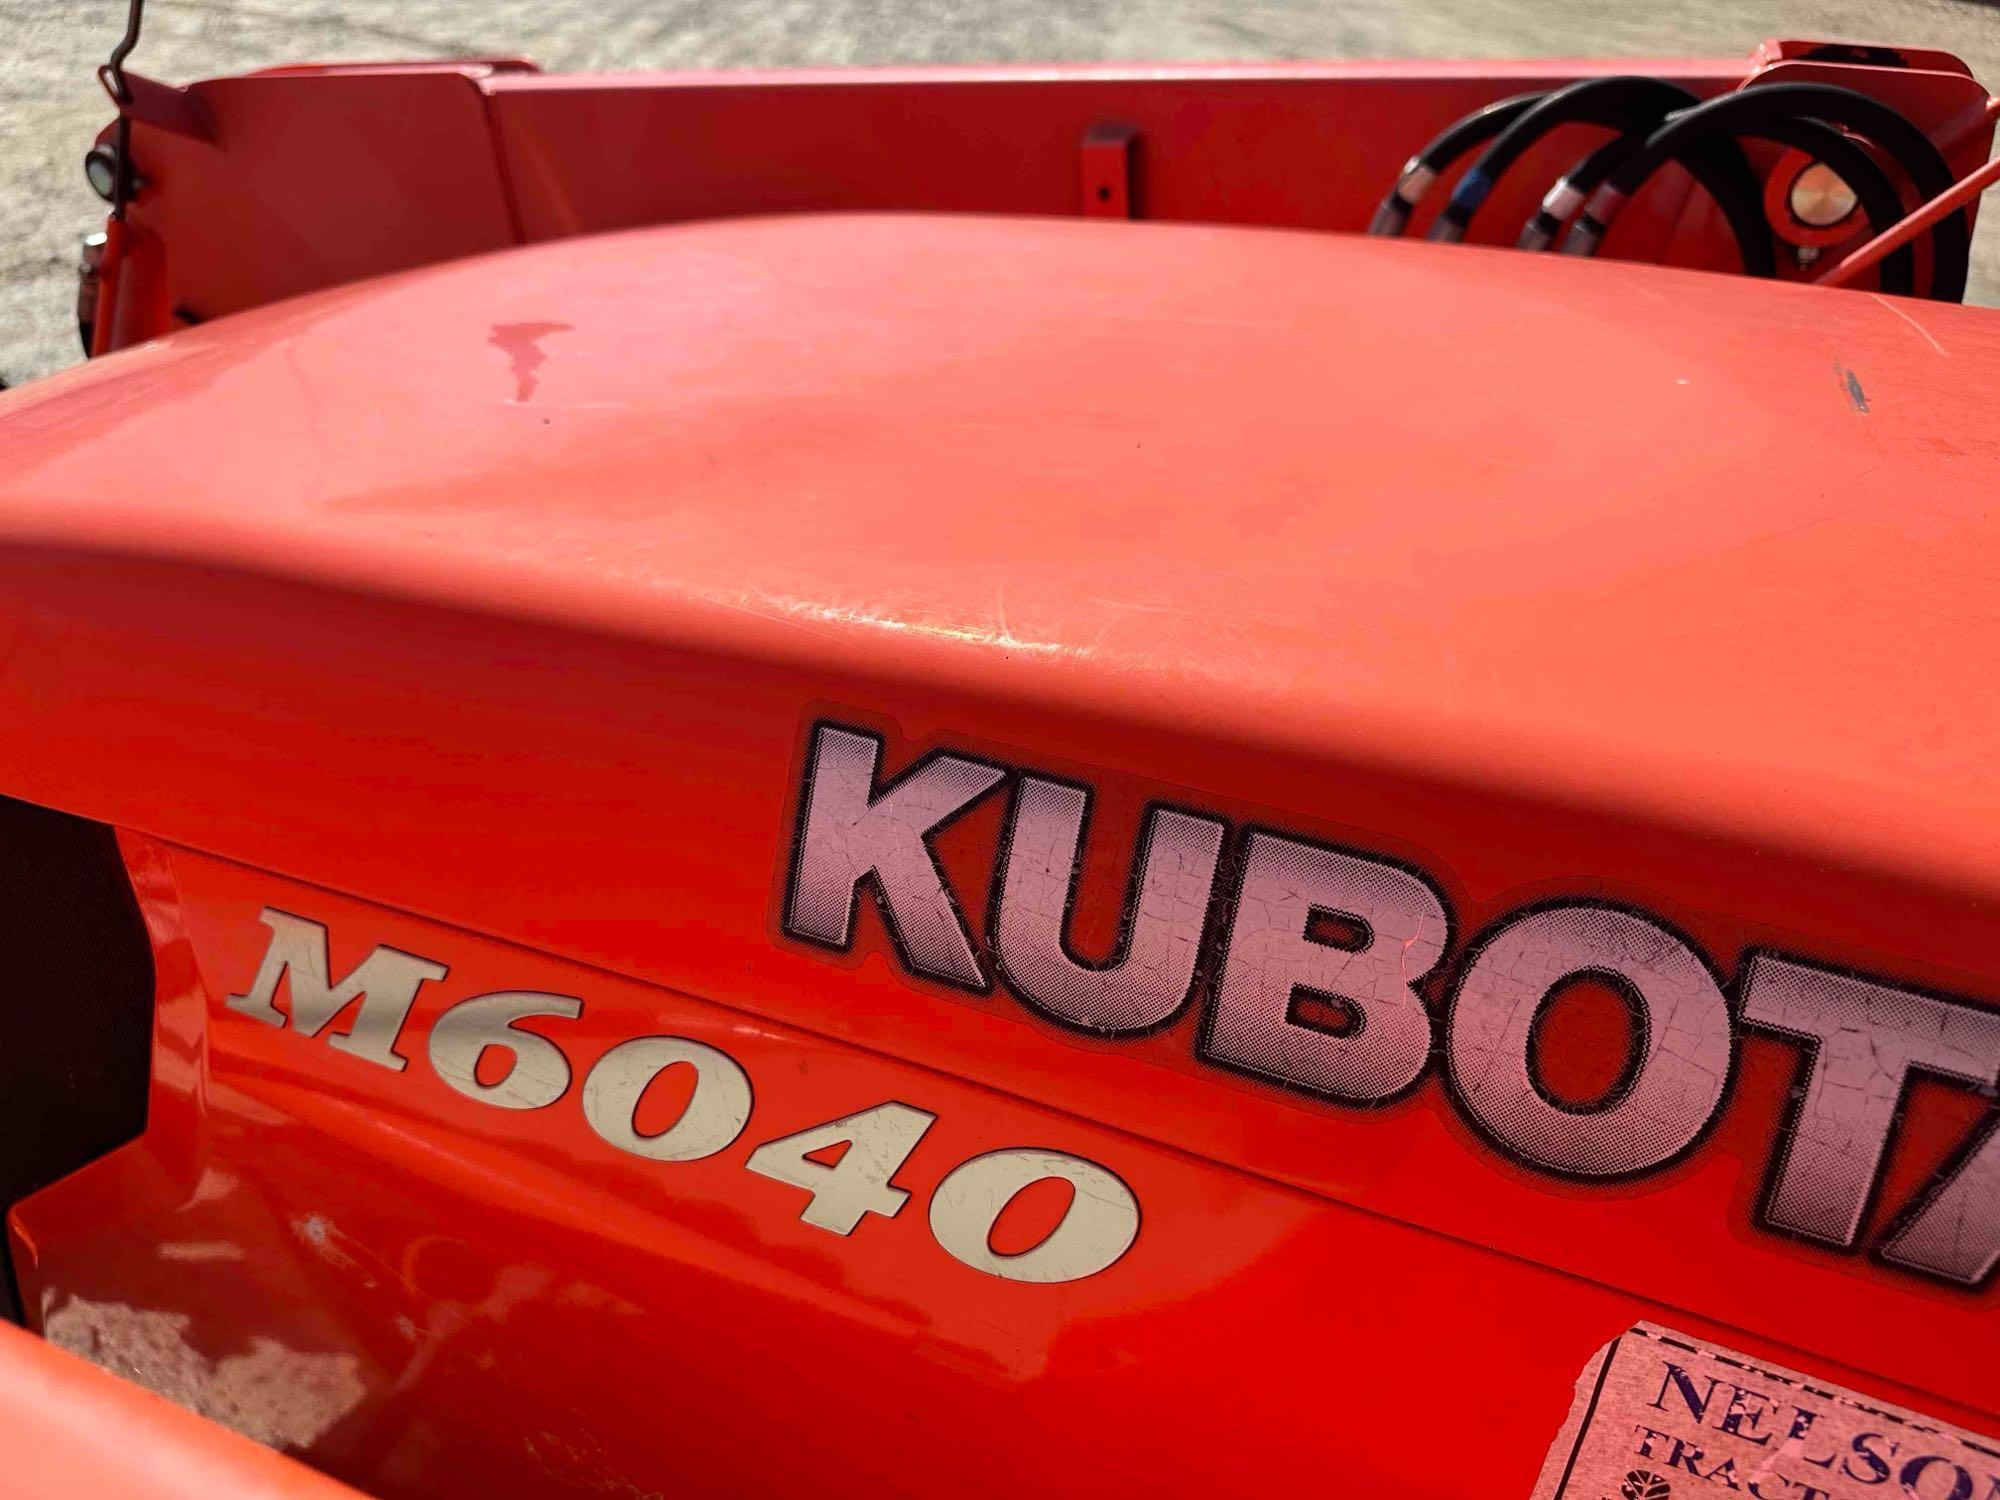 Kubota M6040 4x4 Enclosed Cab Tractor with Front End Loader